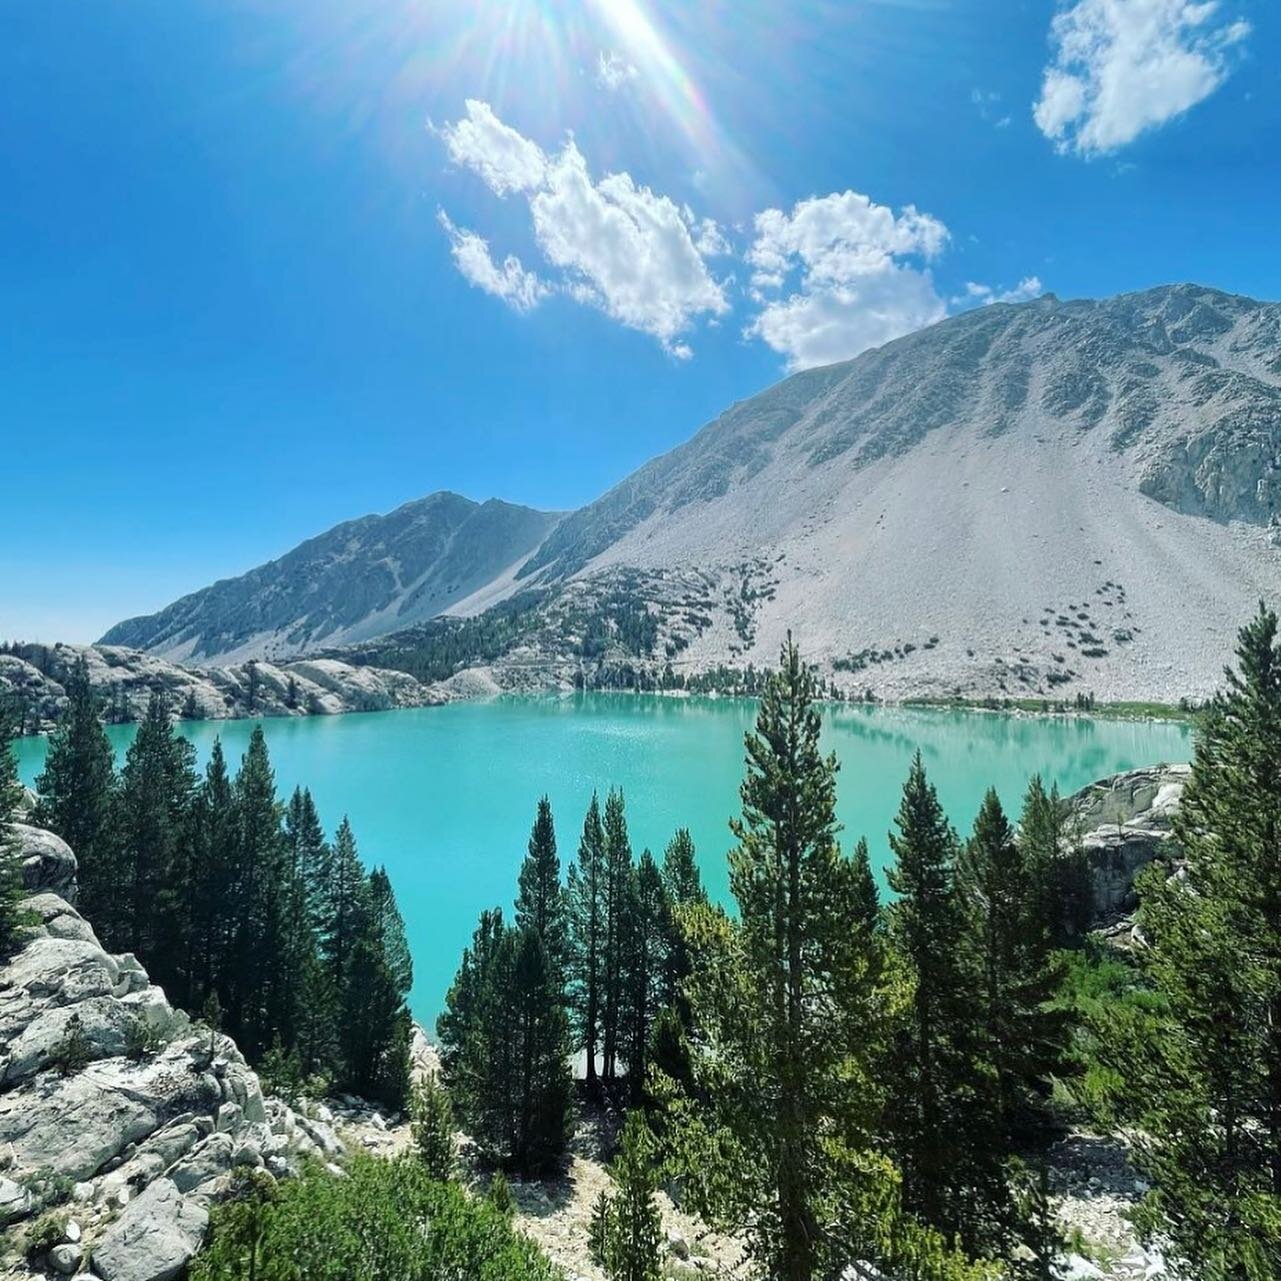 Day 2 of the weekend adventure was epic. I&rsquo;ve been wanting to hike Big Pine Lakes for years now and it was well worth the wait! This place is absolutely stunning. We did it as a day hike because you need to get a permit to camp overnight. Such 